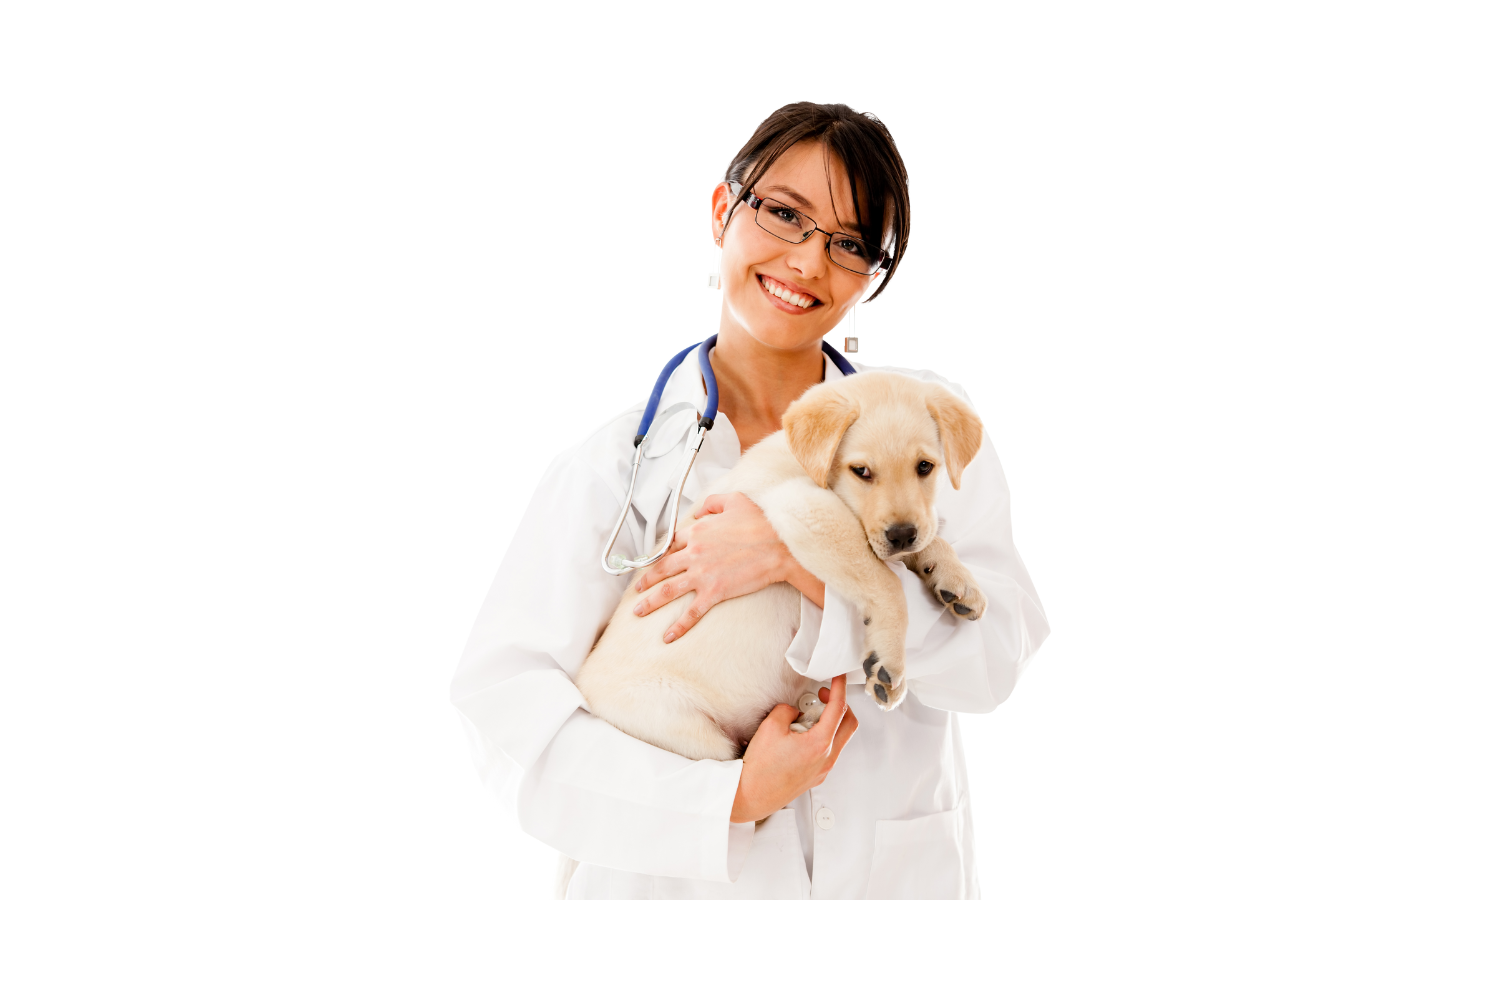 Veterinarian Holding a White Puppy